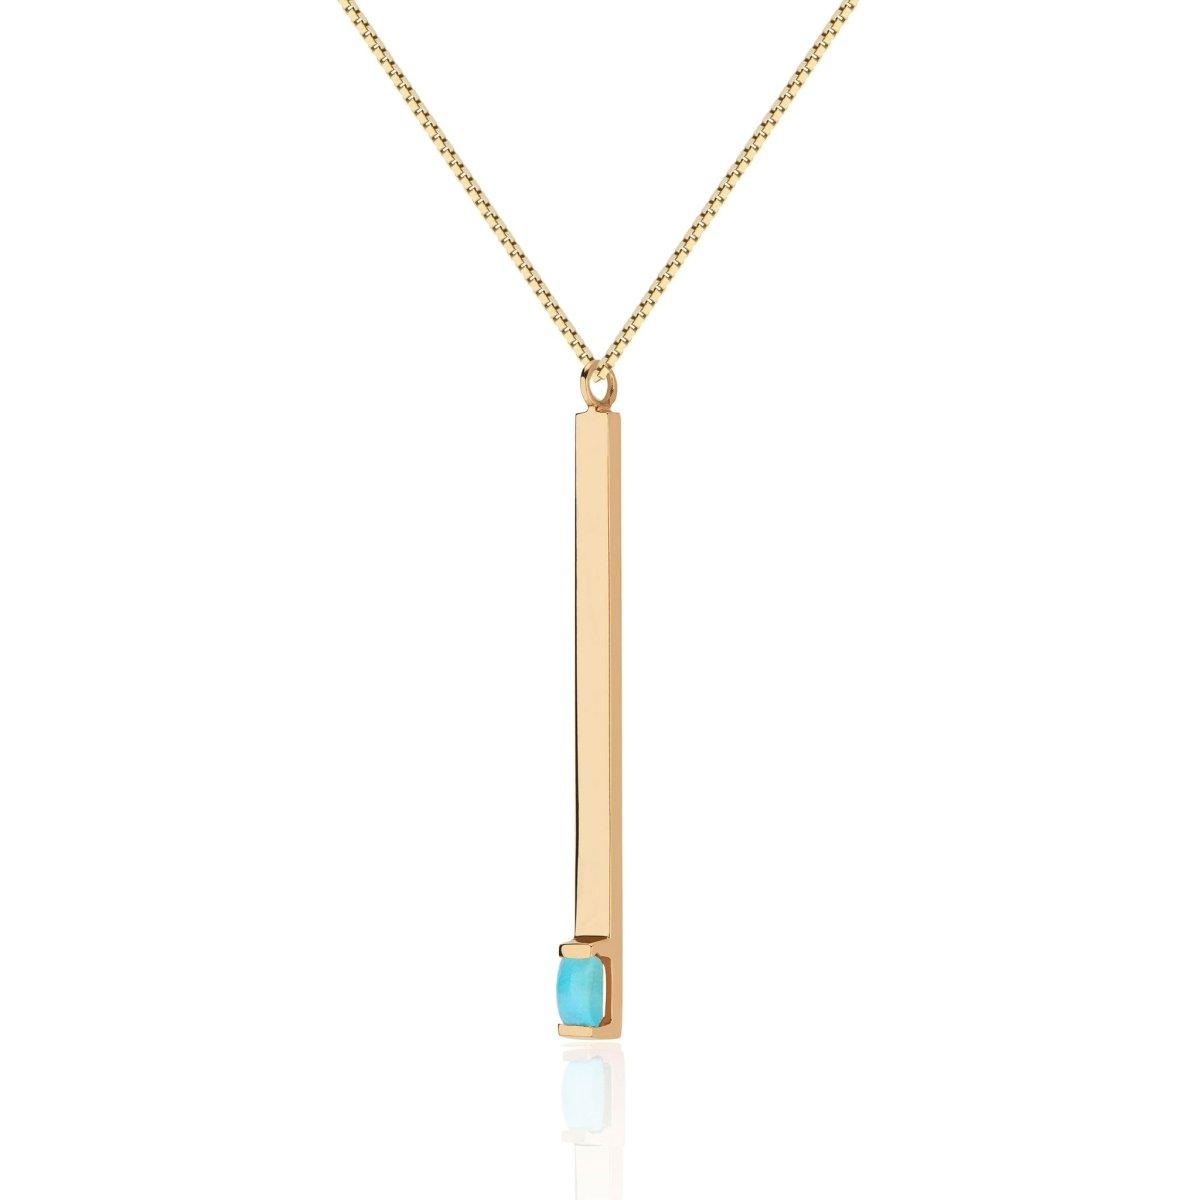 In A Blue Fire Pendant - Nataly Aponte